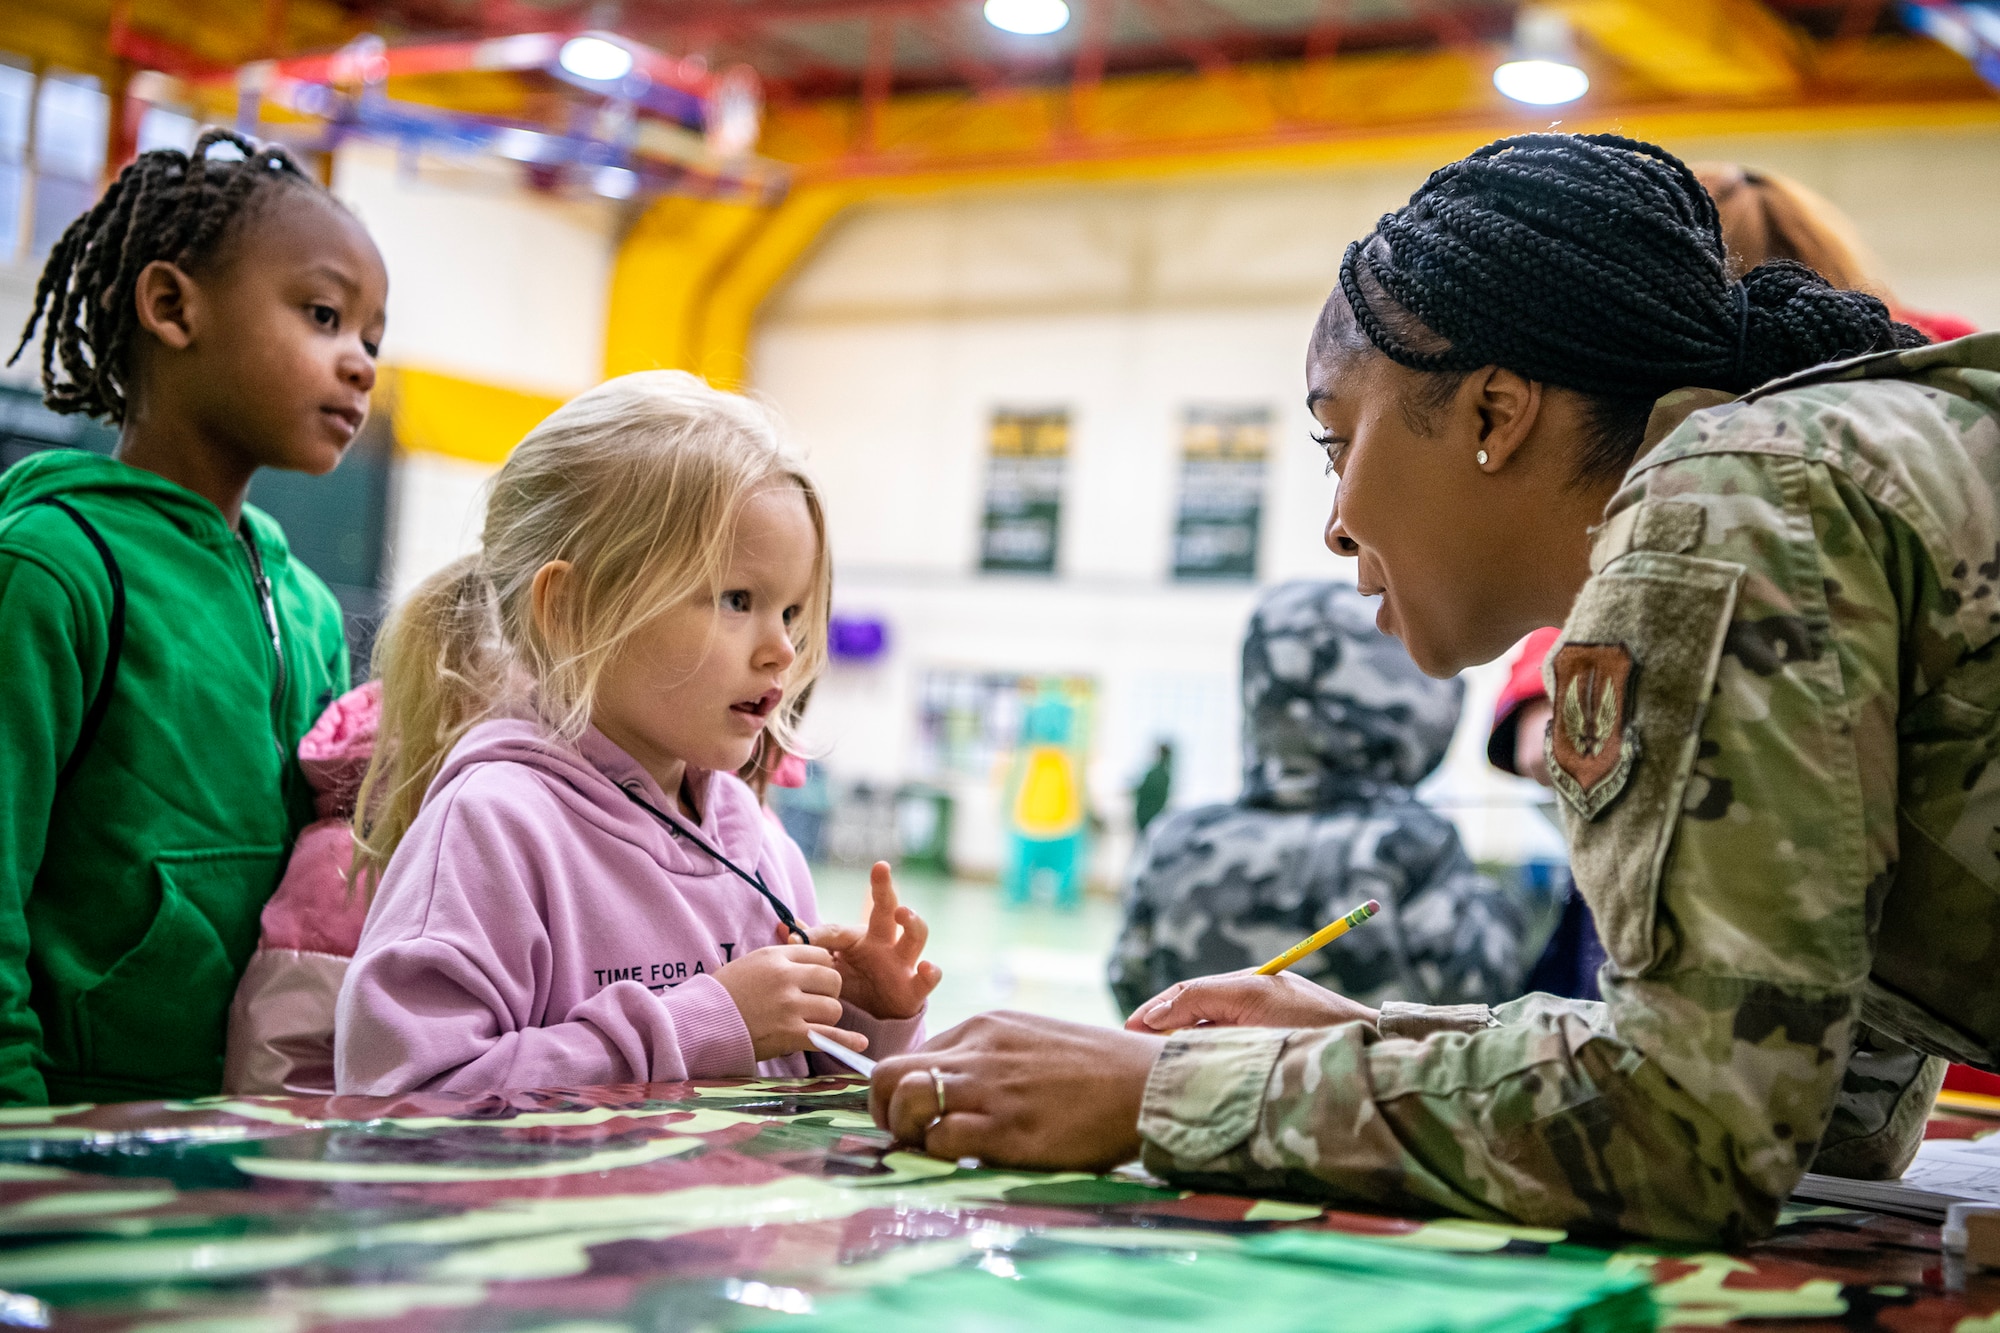 U.S. Air Force Senior Airman Takeira Ayala, 501st Combat Support Wing financial operations technician, speaks with a Alconbury Elementary School student during Camp Kudos at RAF Alconbury, England, April 14, 2023. The camp gave students the opportunity to experience and learn about various aspects of deployment preparation and the wing mission. (U.S. Air Force photo by Staff Sgt. Eugene Oliver)